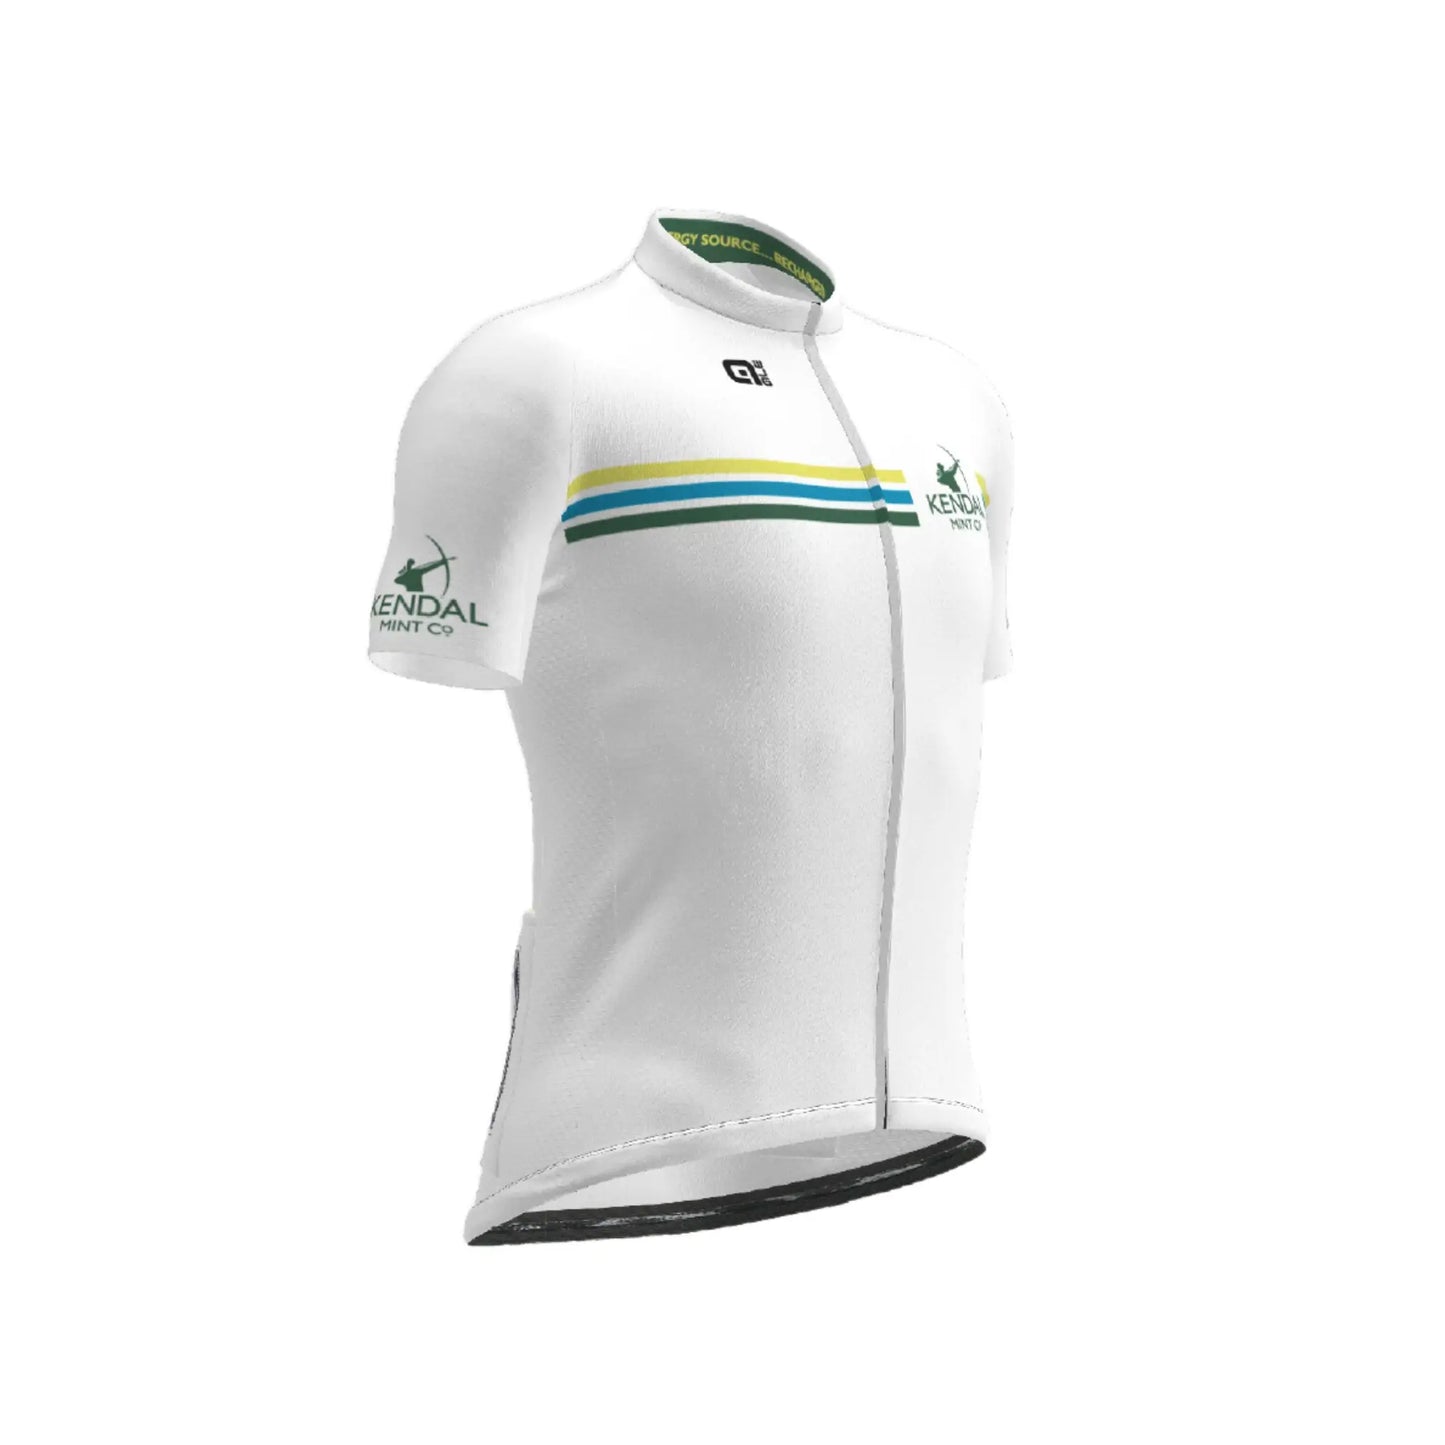 Kendal Mint Co X Alé Cycling Jersey - Mens (Brand New - Limited Edition)